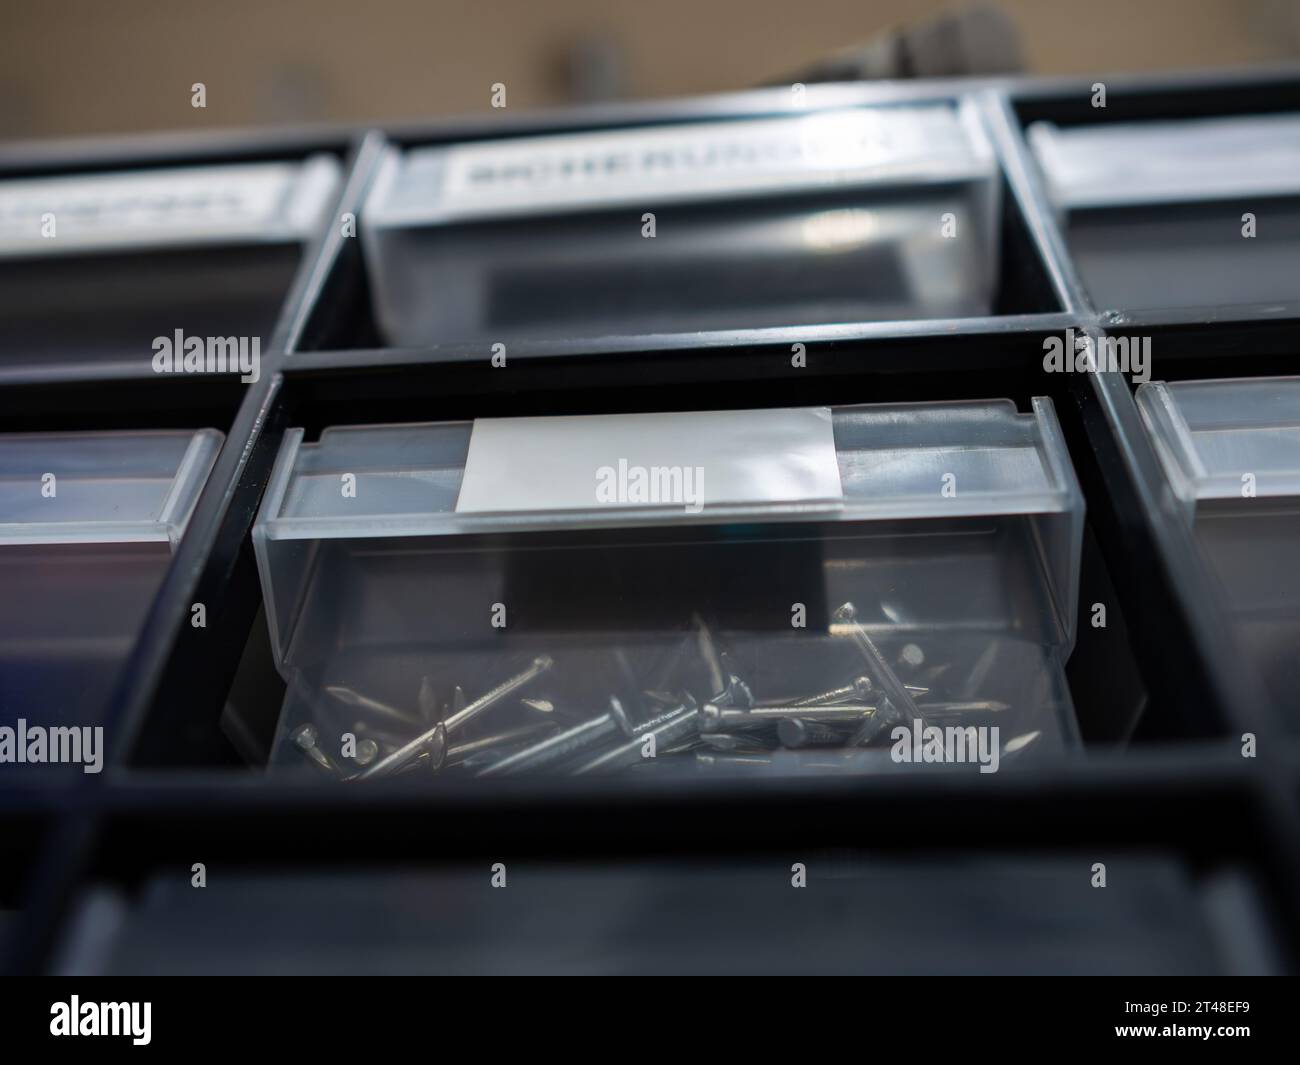 Plastic bin with small nails in a storage box. The label is empty. The hardware in a garage workshop is organized in different compartments. Stock Photo